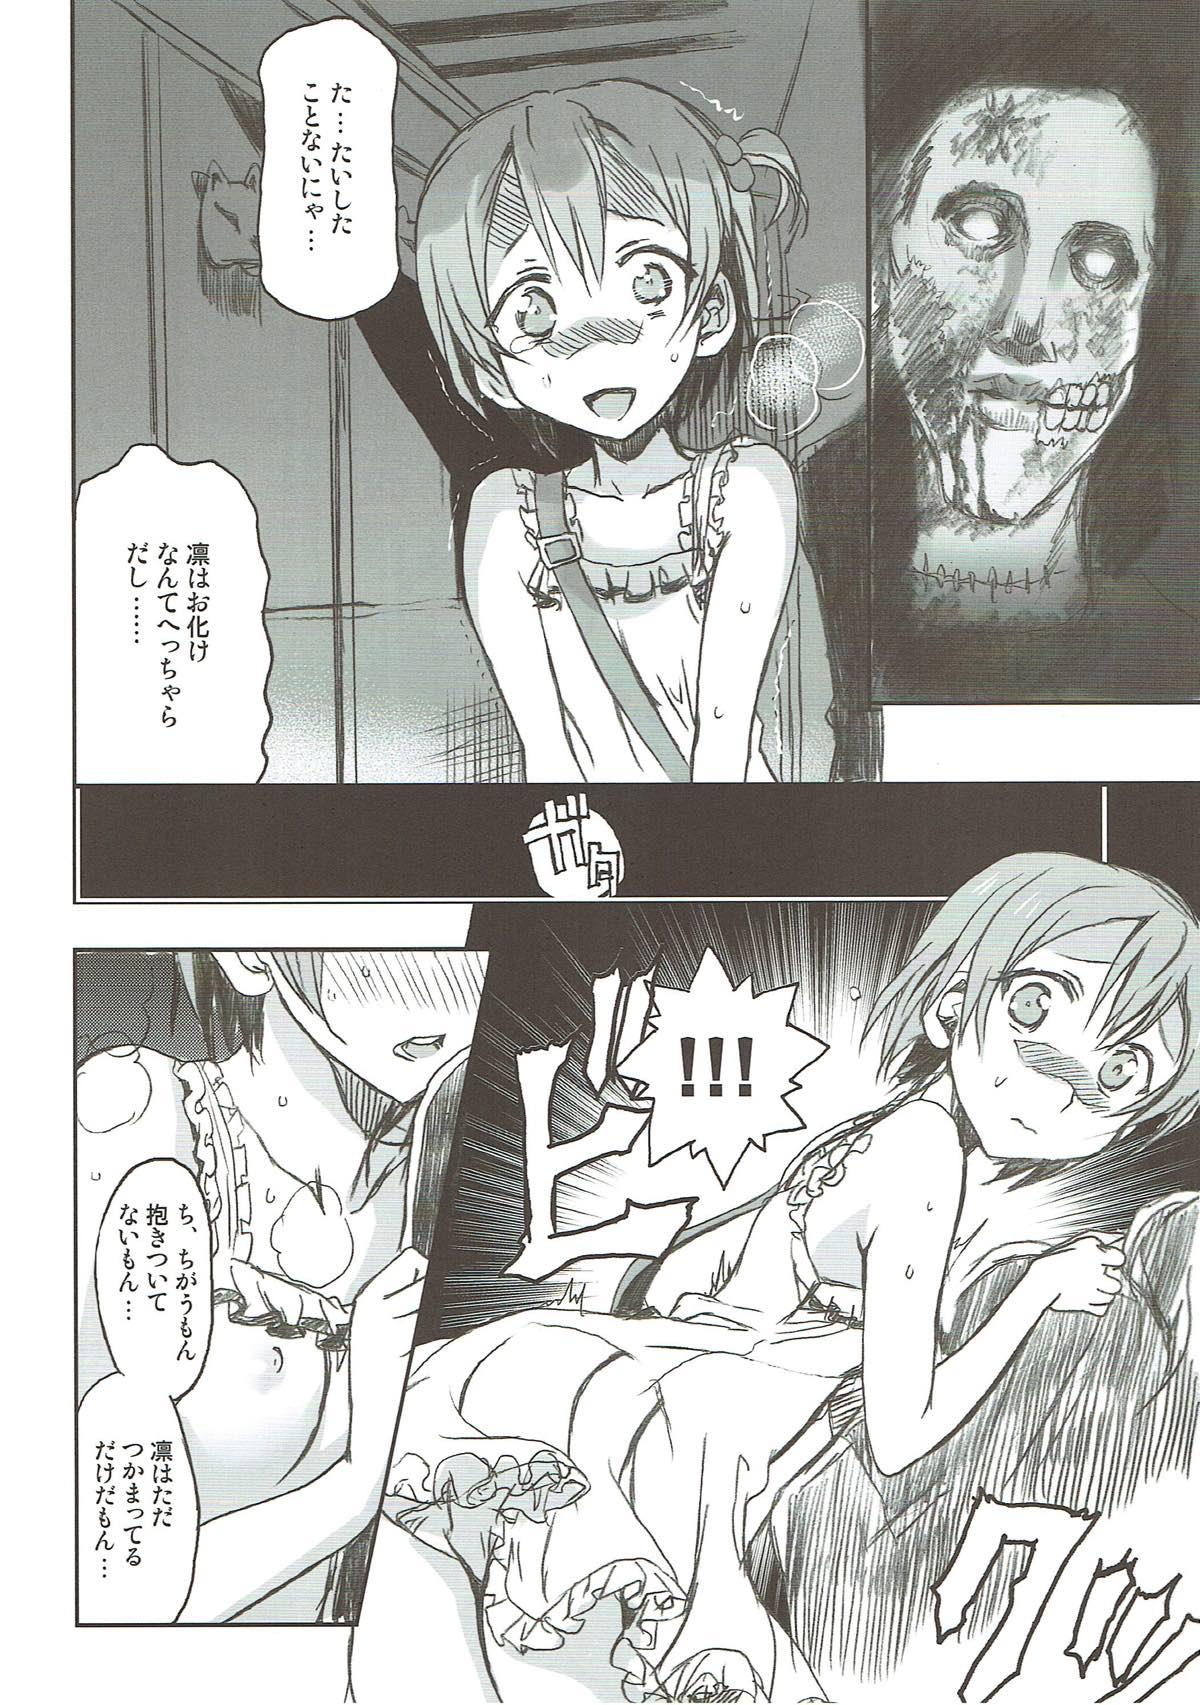 Handsome Hoshisora Kanojo. - Love live Swallow - Page 11